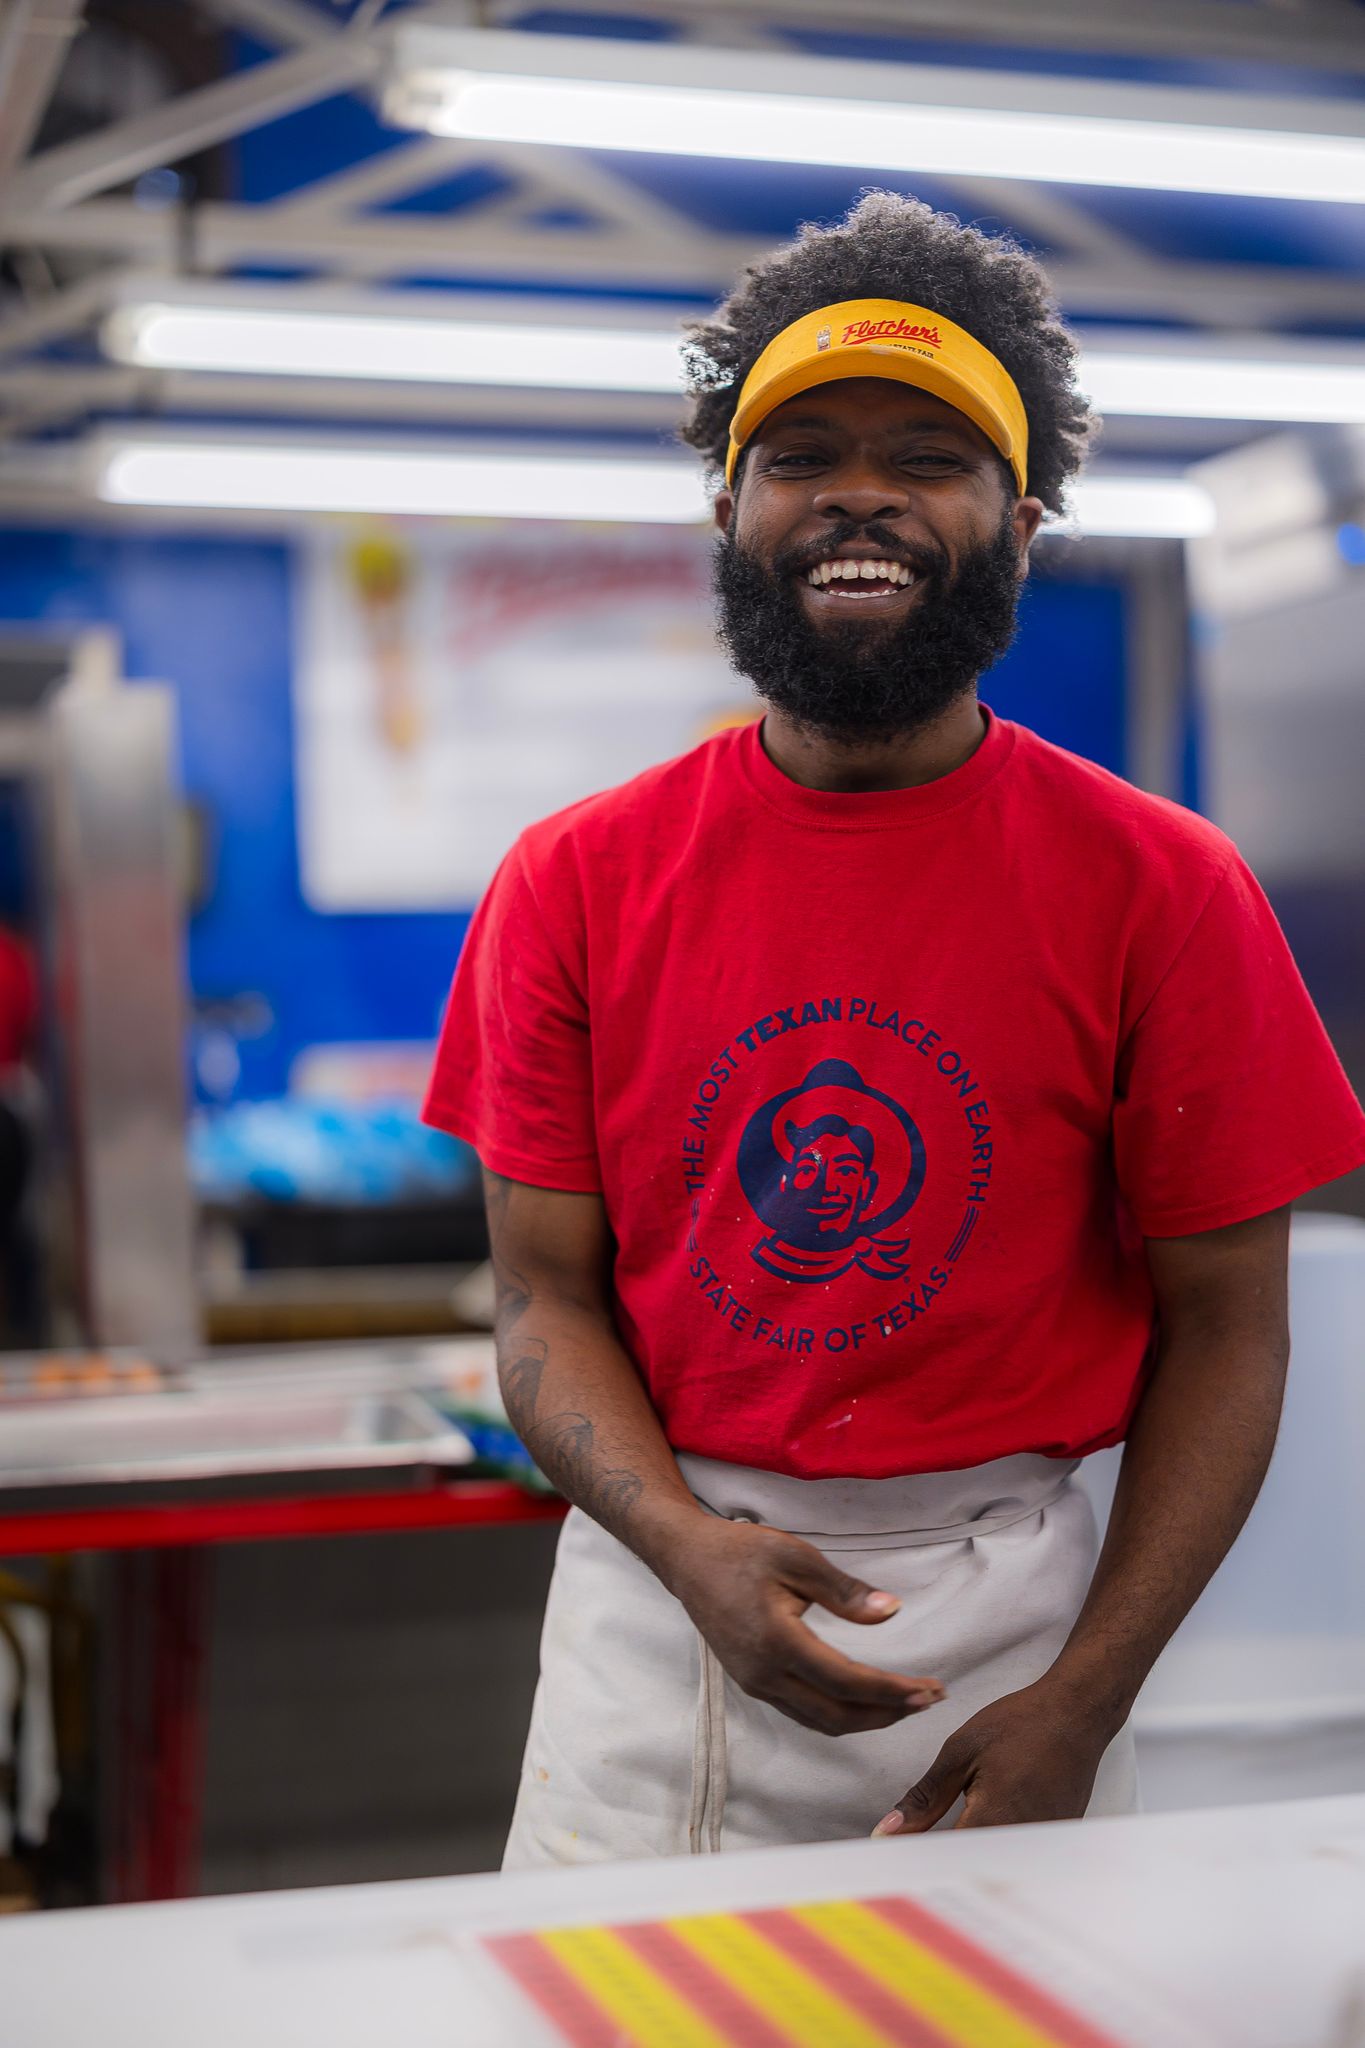 A worker at the State Fair of Texas prepares to serve a corn dog with a smile